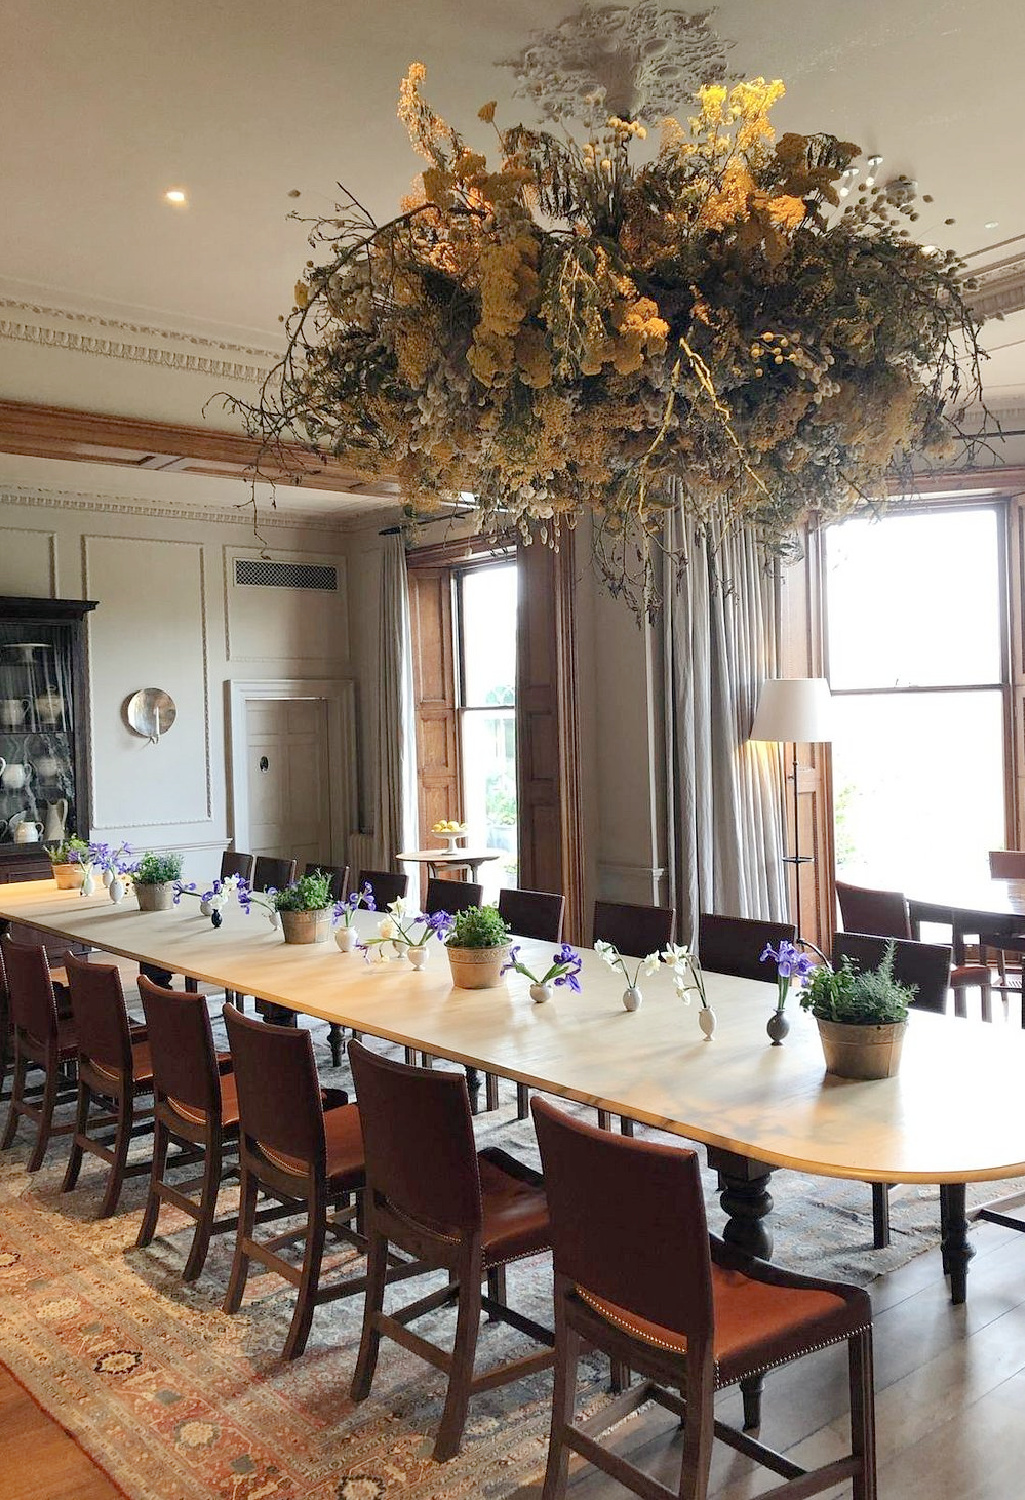 Fanciful dried floral chandelier above long oval dining table at Heckfield Place in Hampshire England. #hotels #heckfieldplace